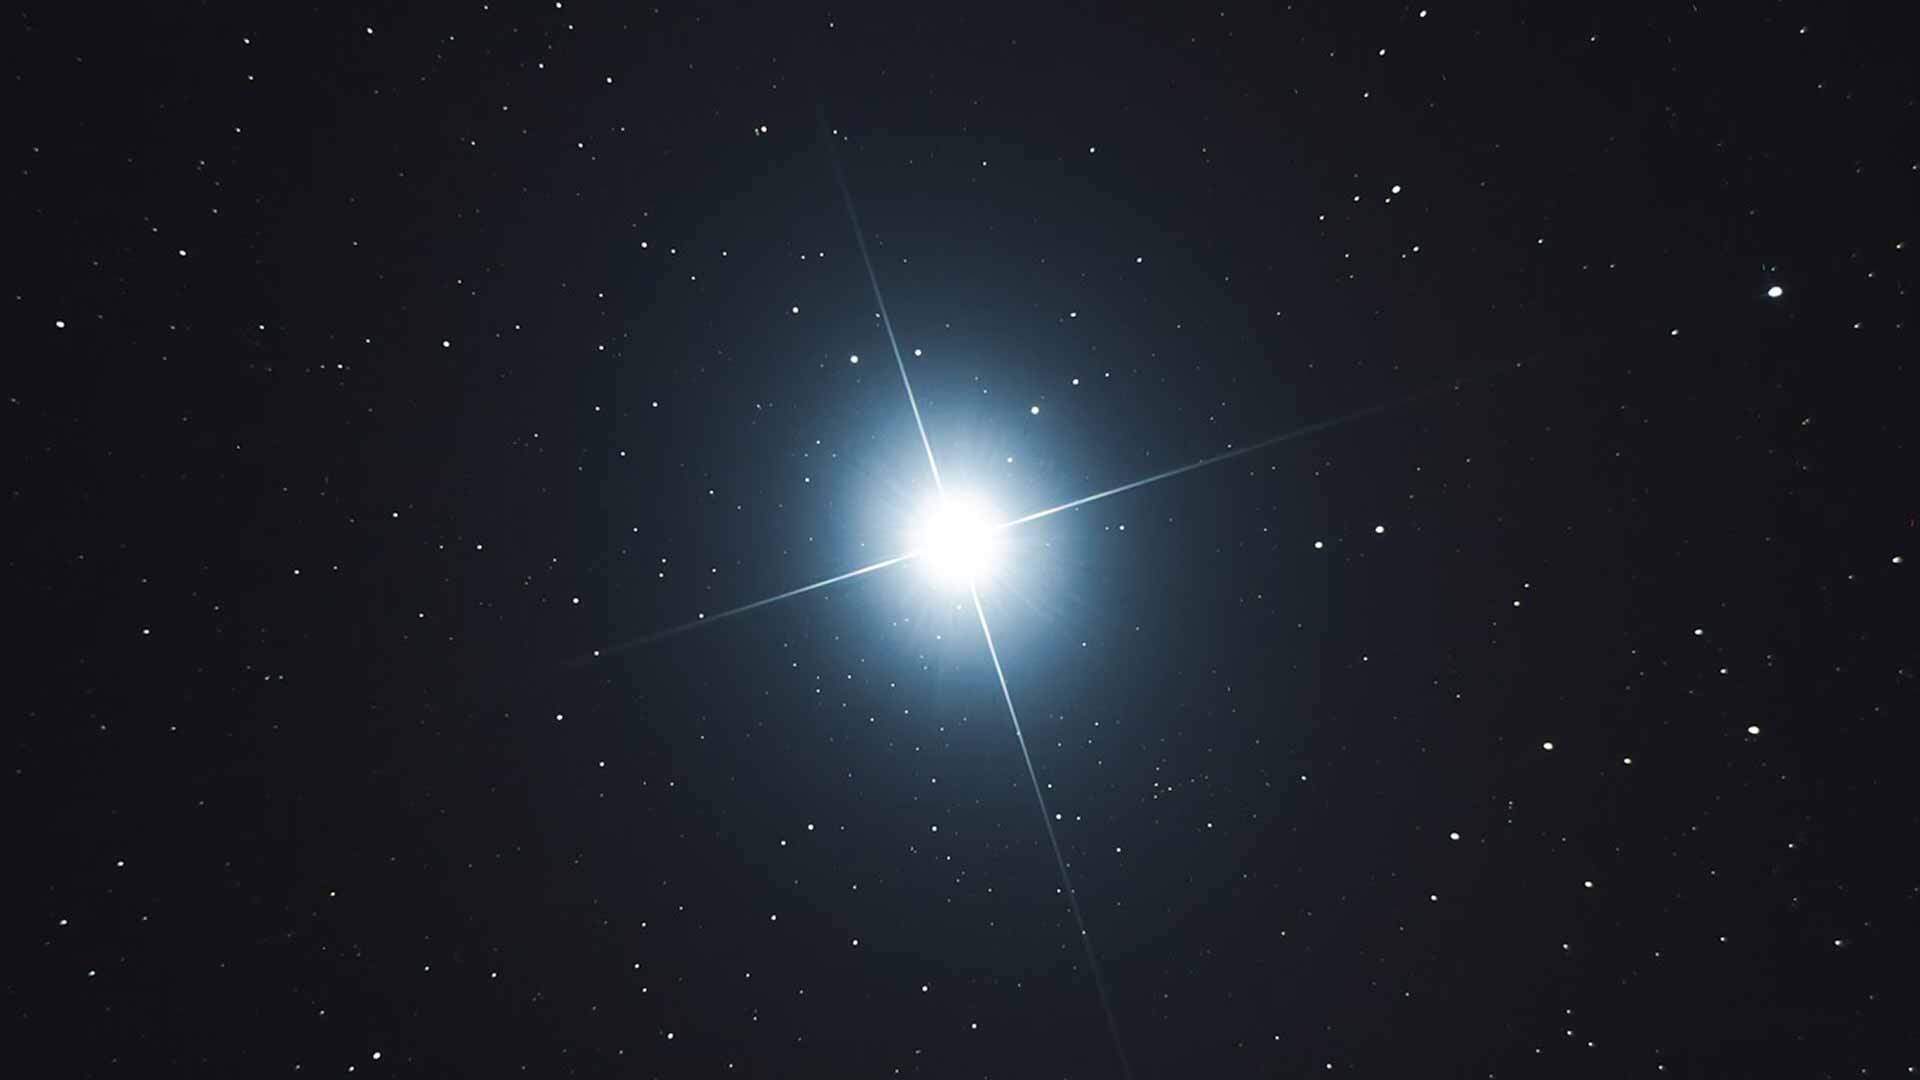 The 10 Brightest Stars In The Sky Stellar Discovery